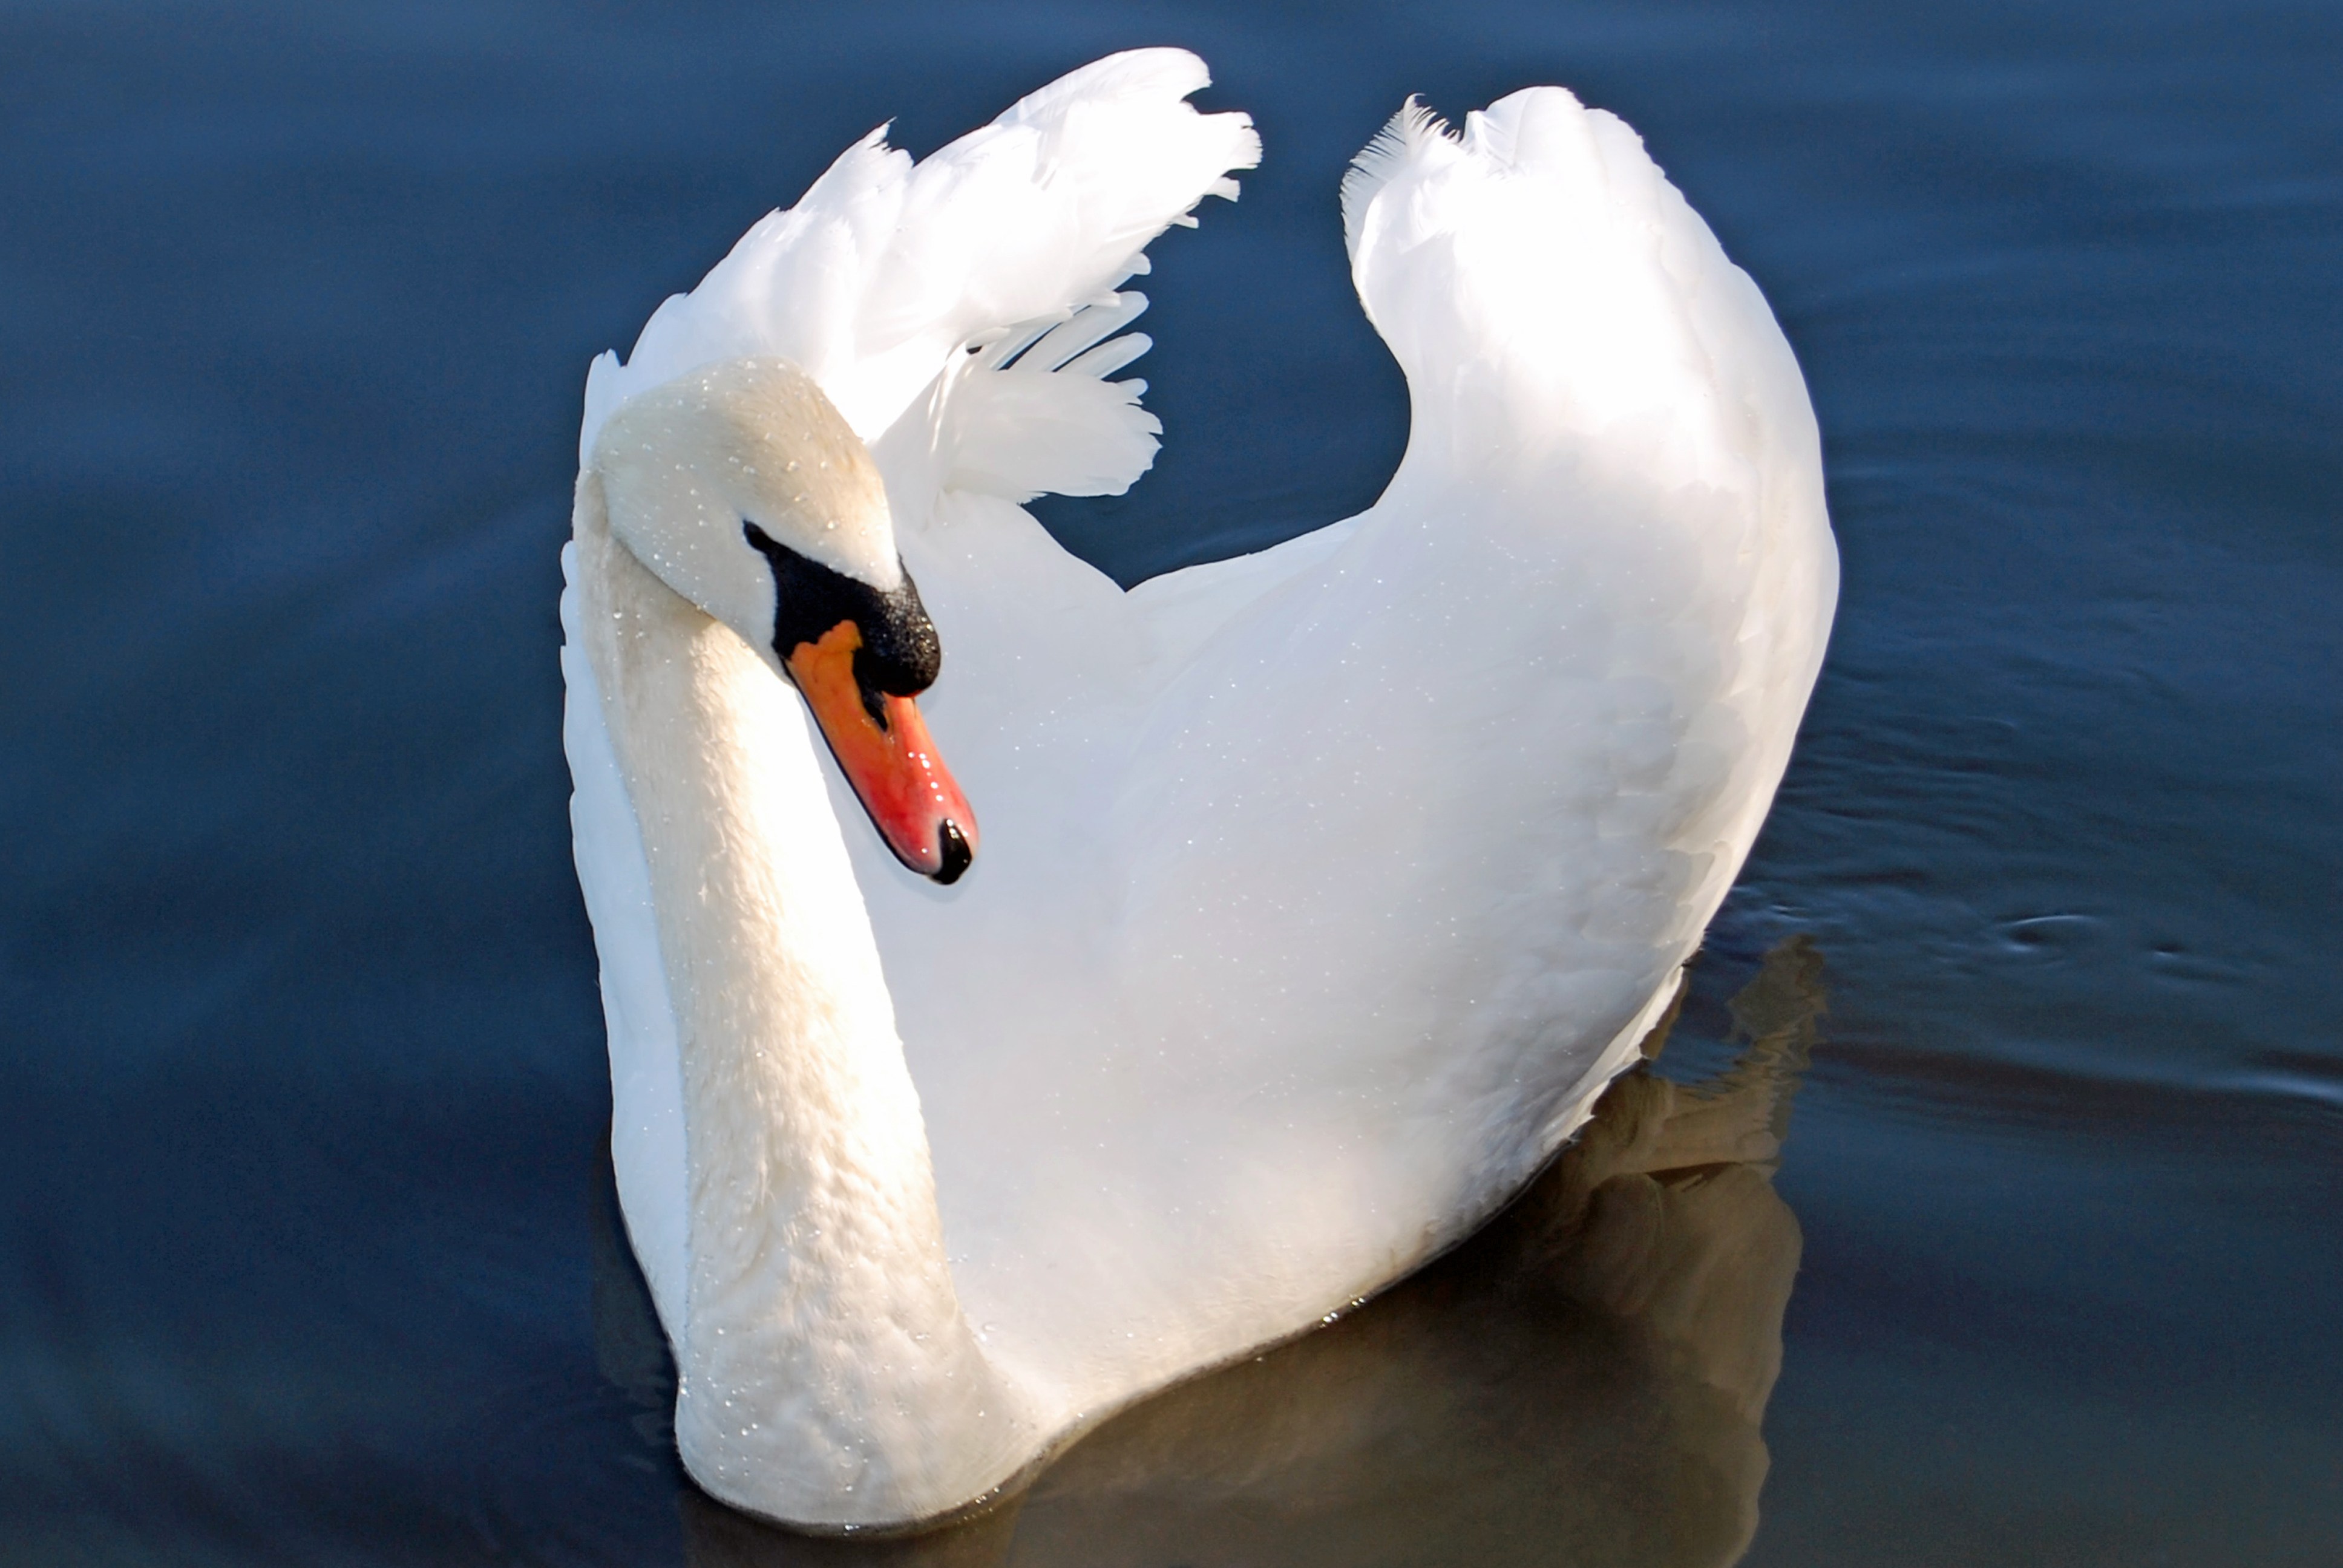 Why You Want to Hire SWANs | Workology